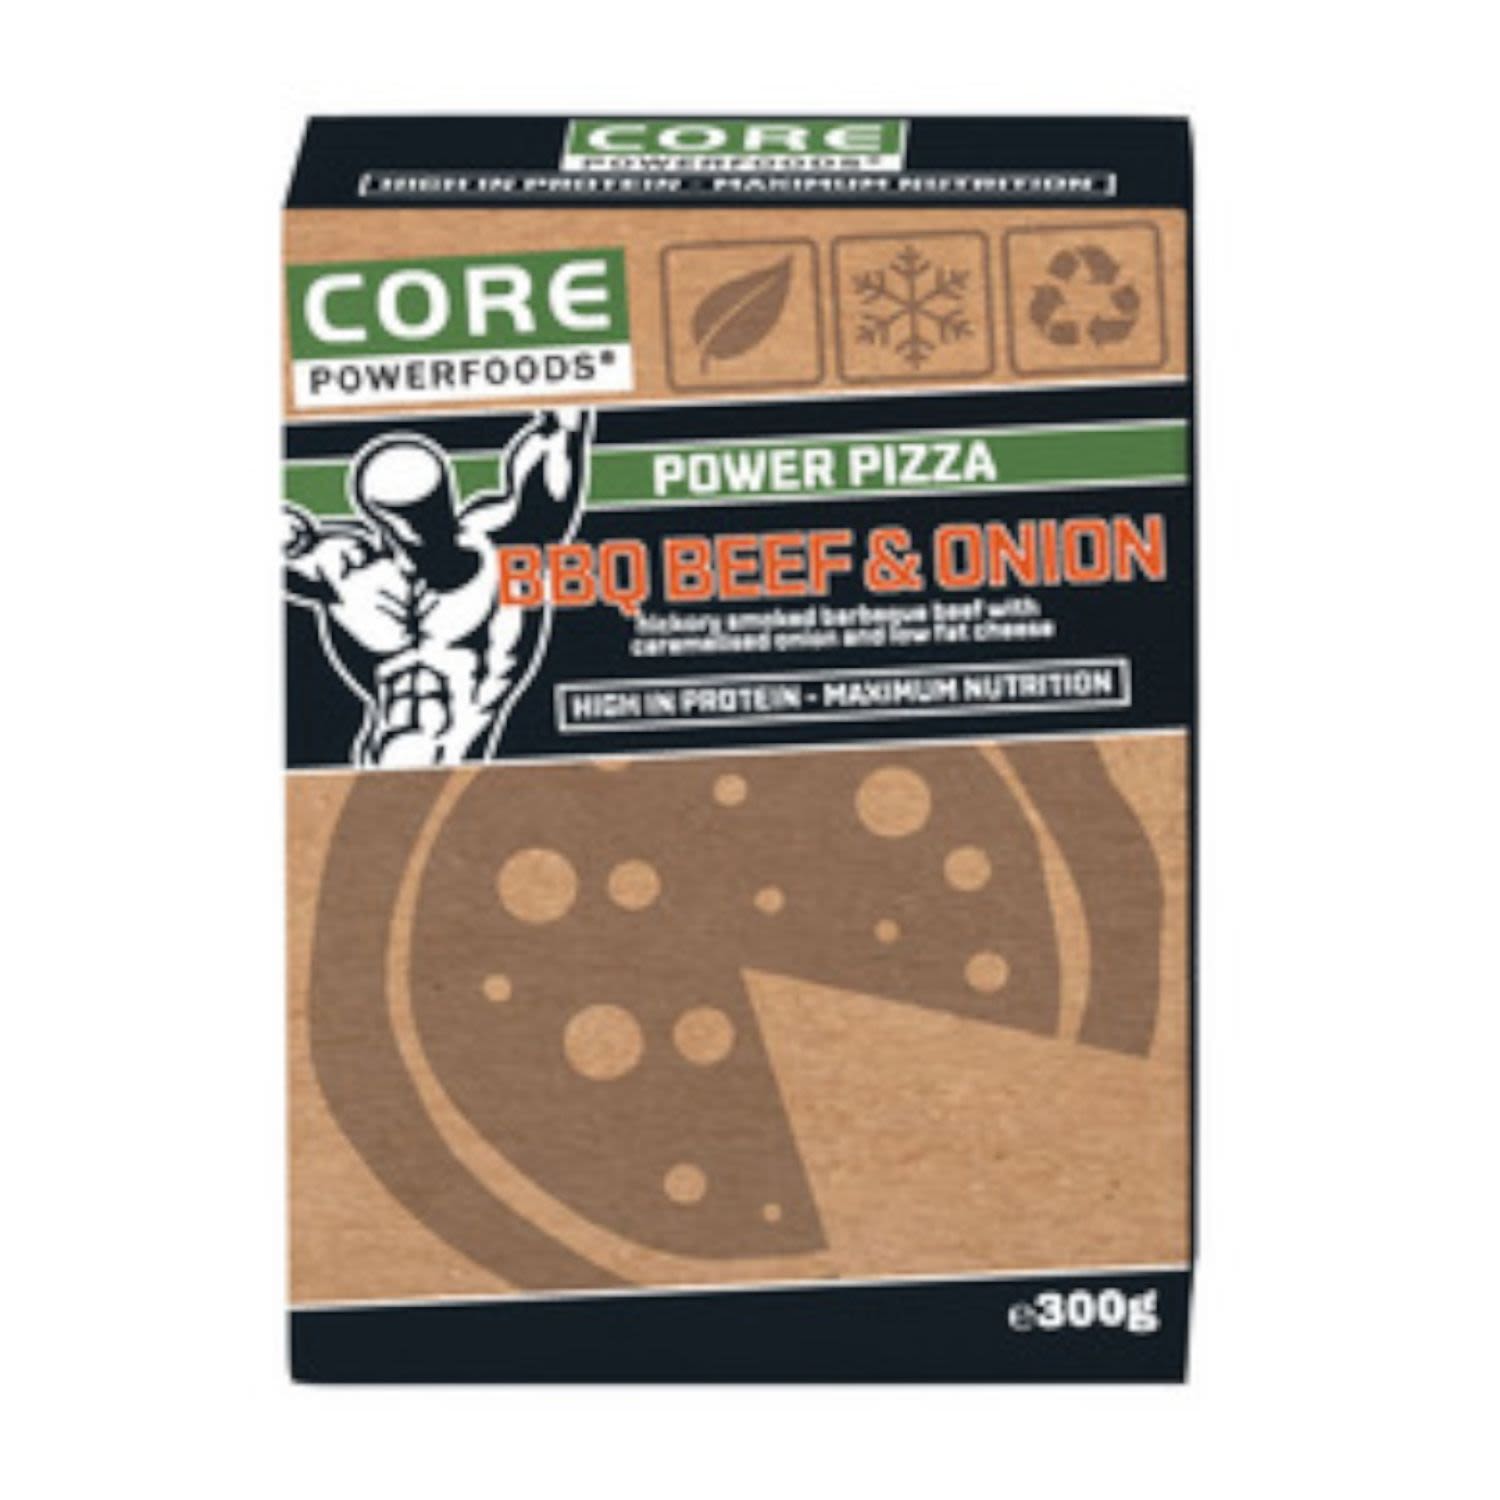 Core Powerfoods Pizza BBQ Beef & Onions, 300 Gram